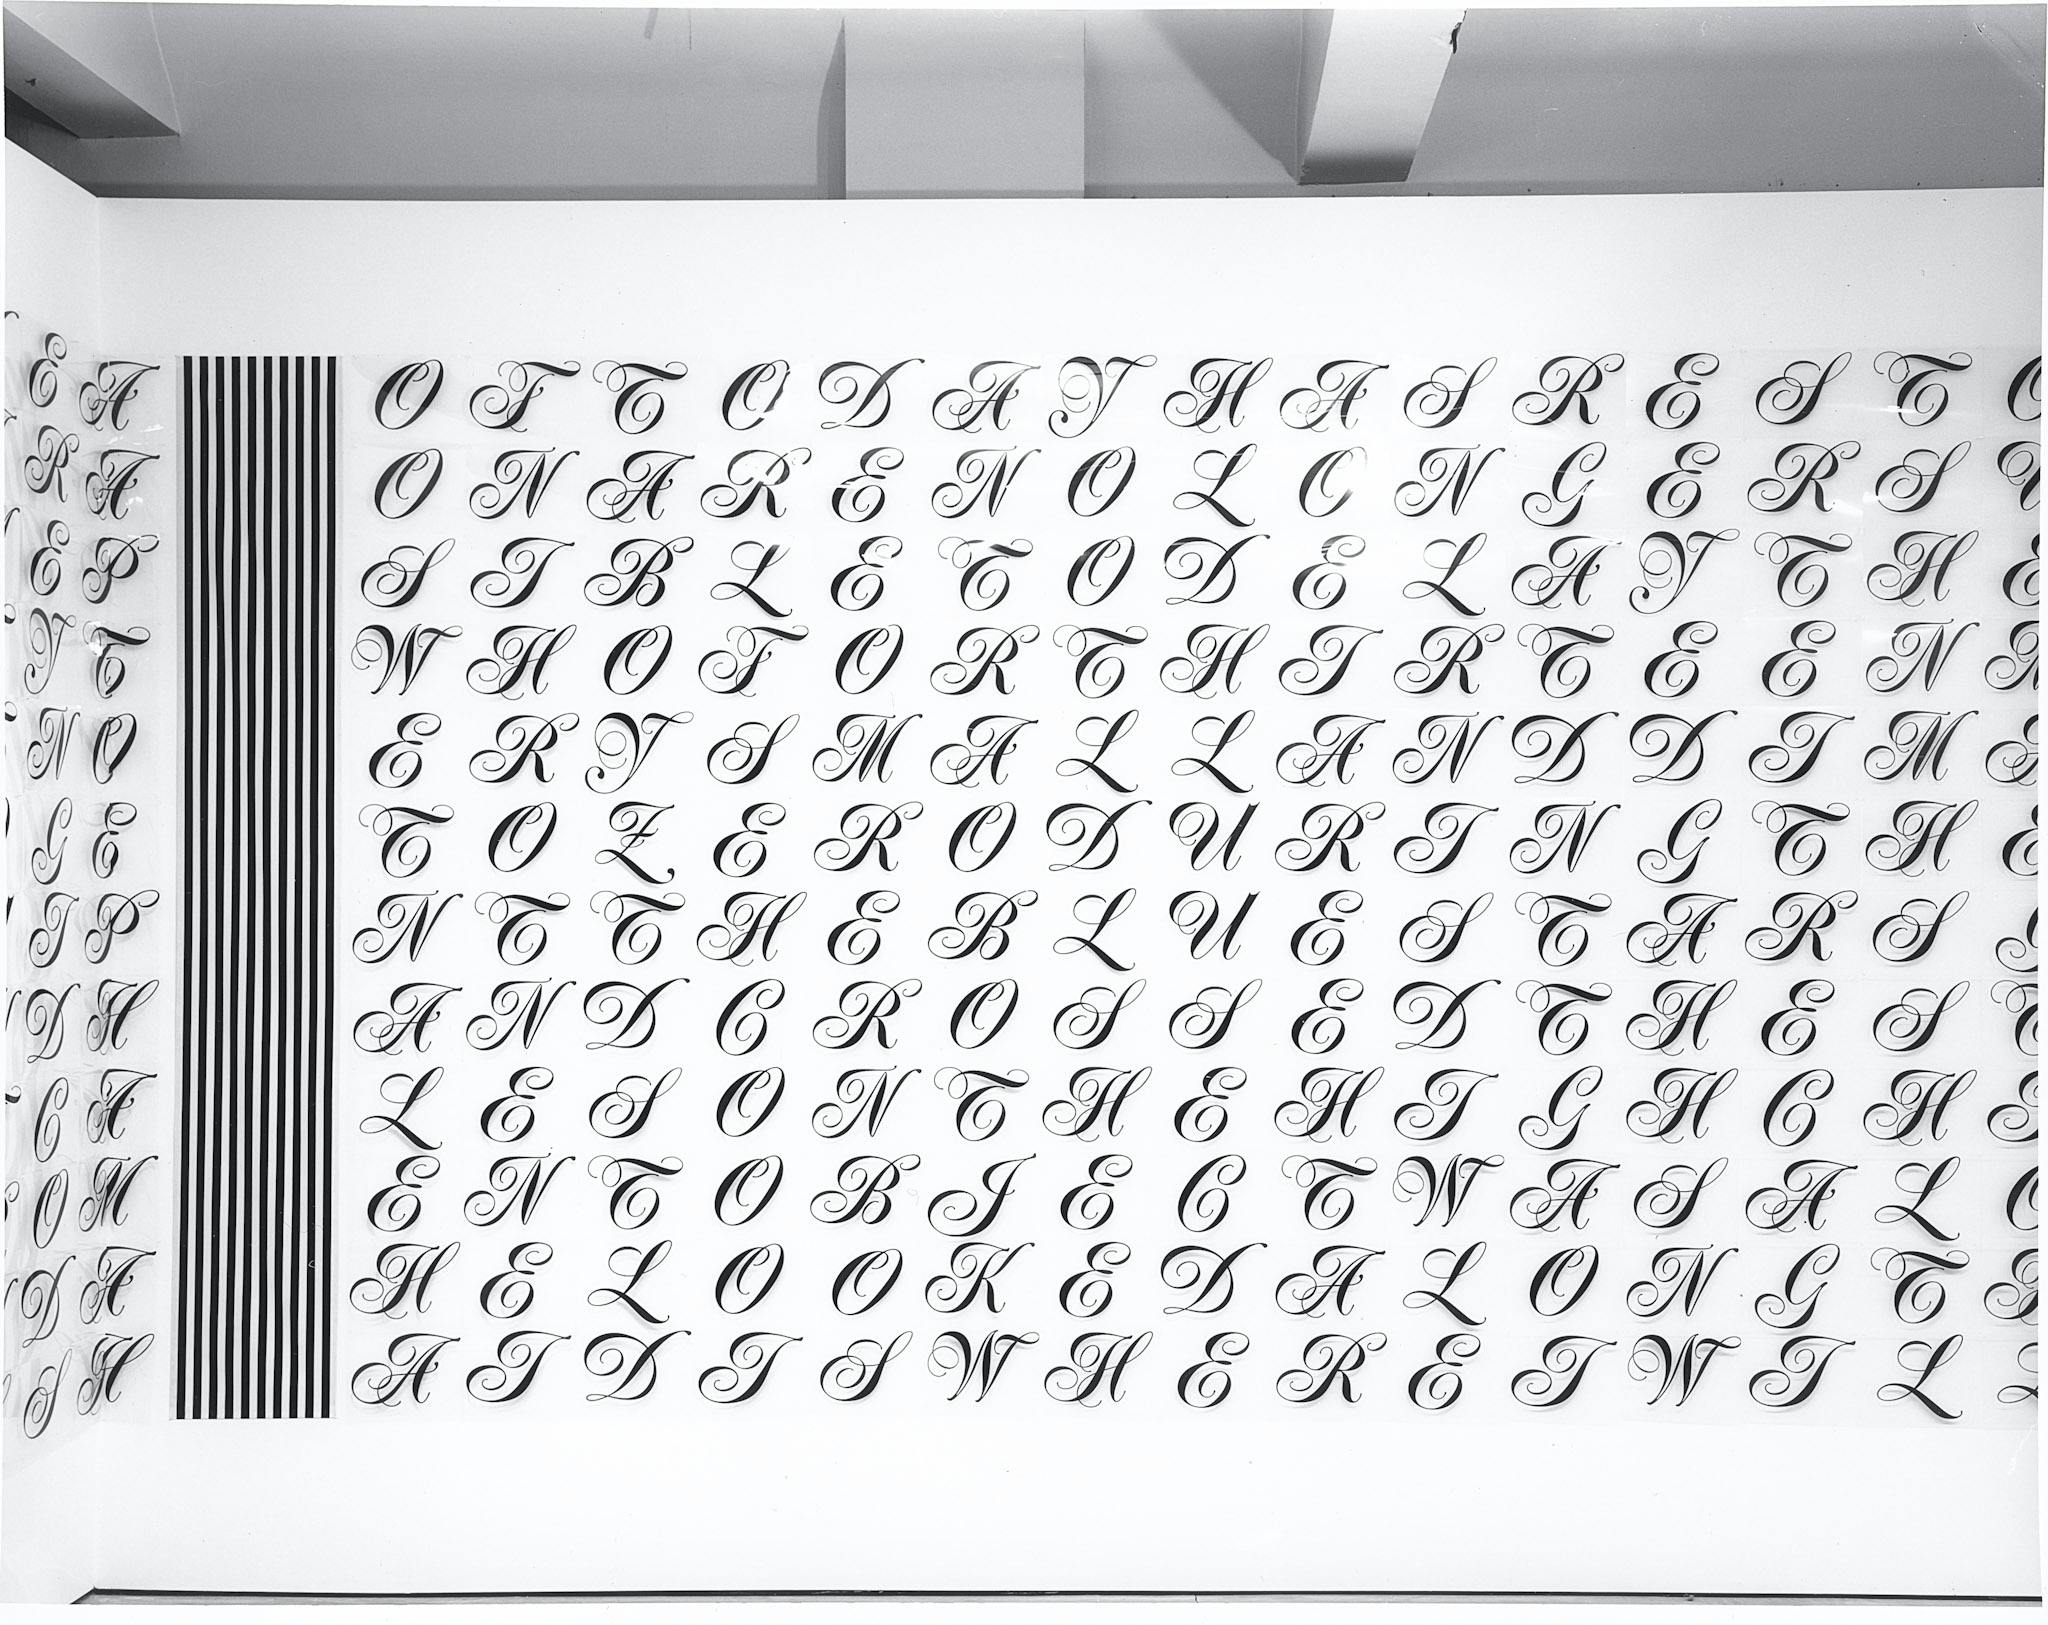 Cursive capital letters mounted on a white wall. They are printed on clear plastic sheets and are arranged neatly but out of alphabetical order. The letters are thin and highly ornate. 